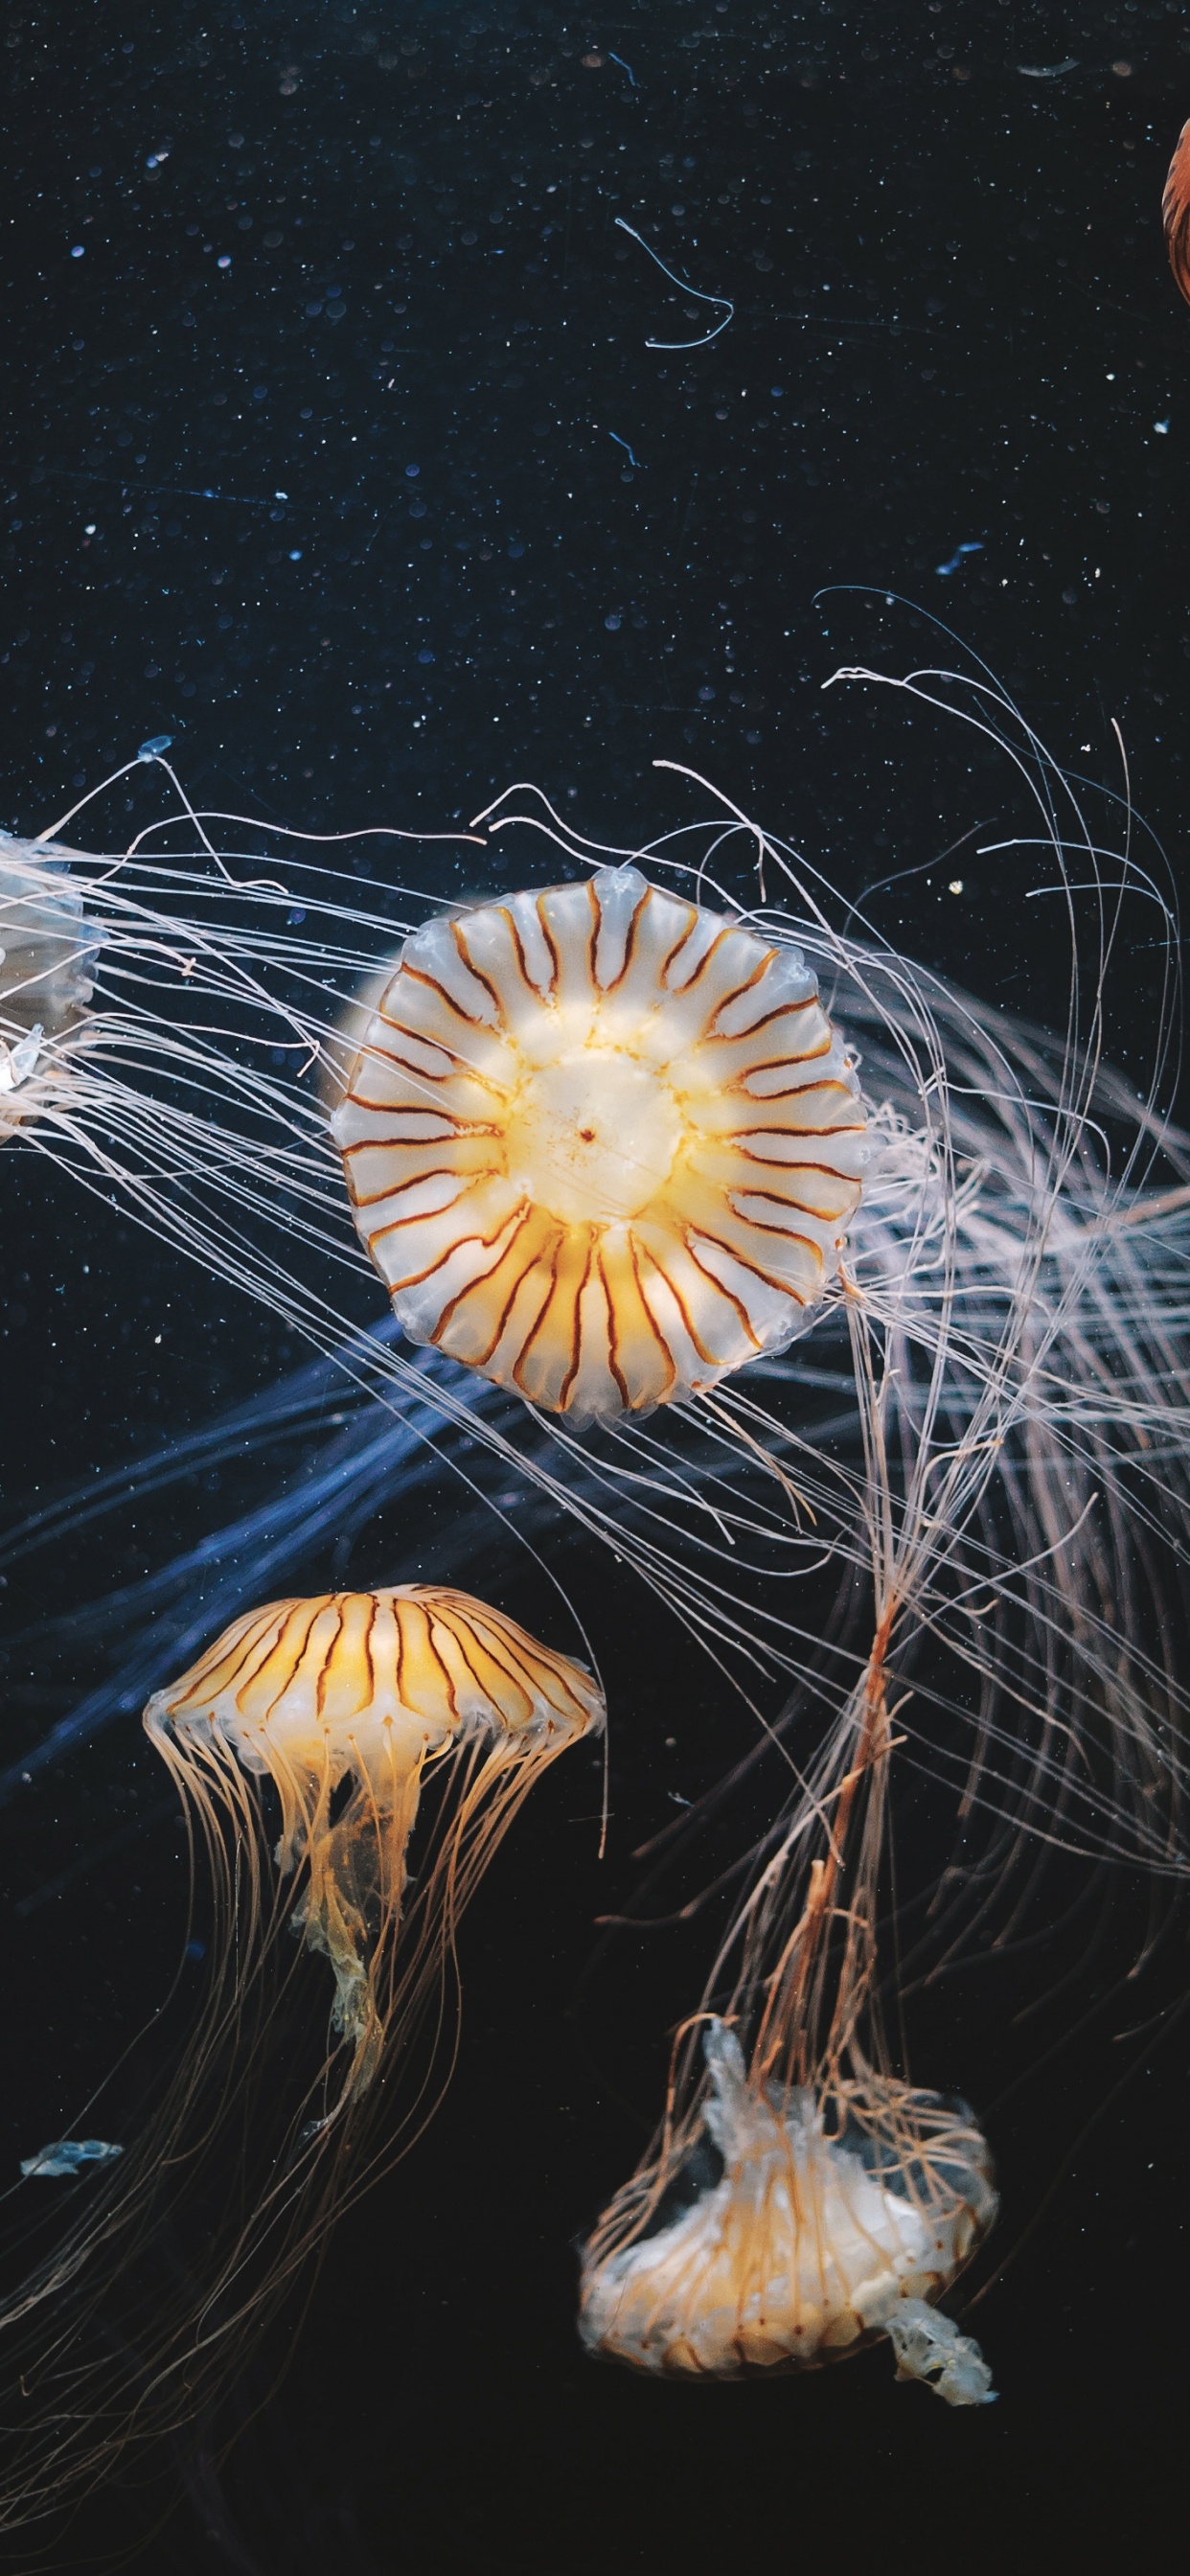 White and Brown Jellyfish in Water. Wallpaper in 1242x2688 Resolution